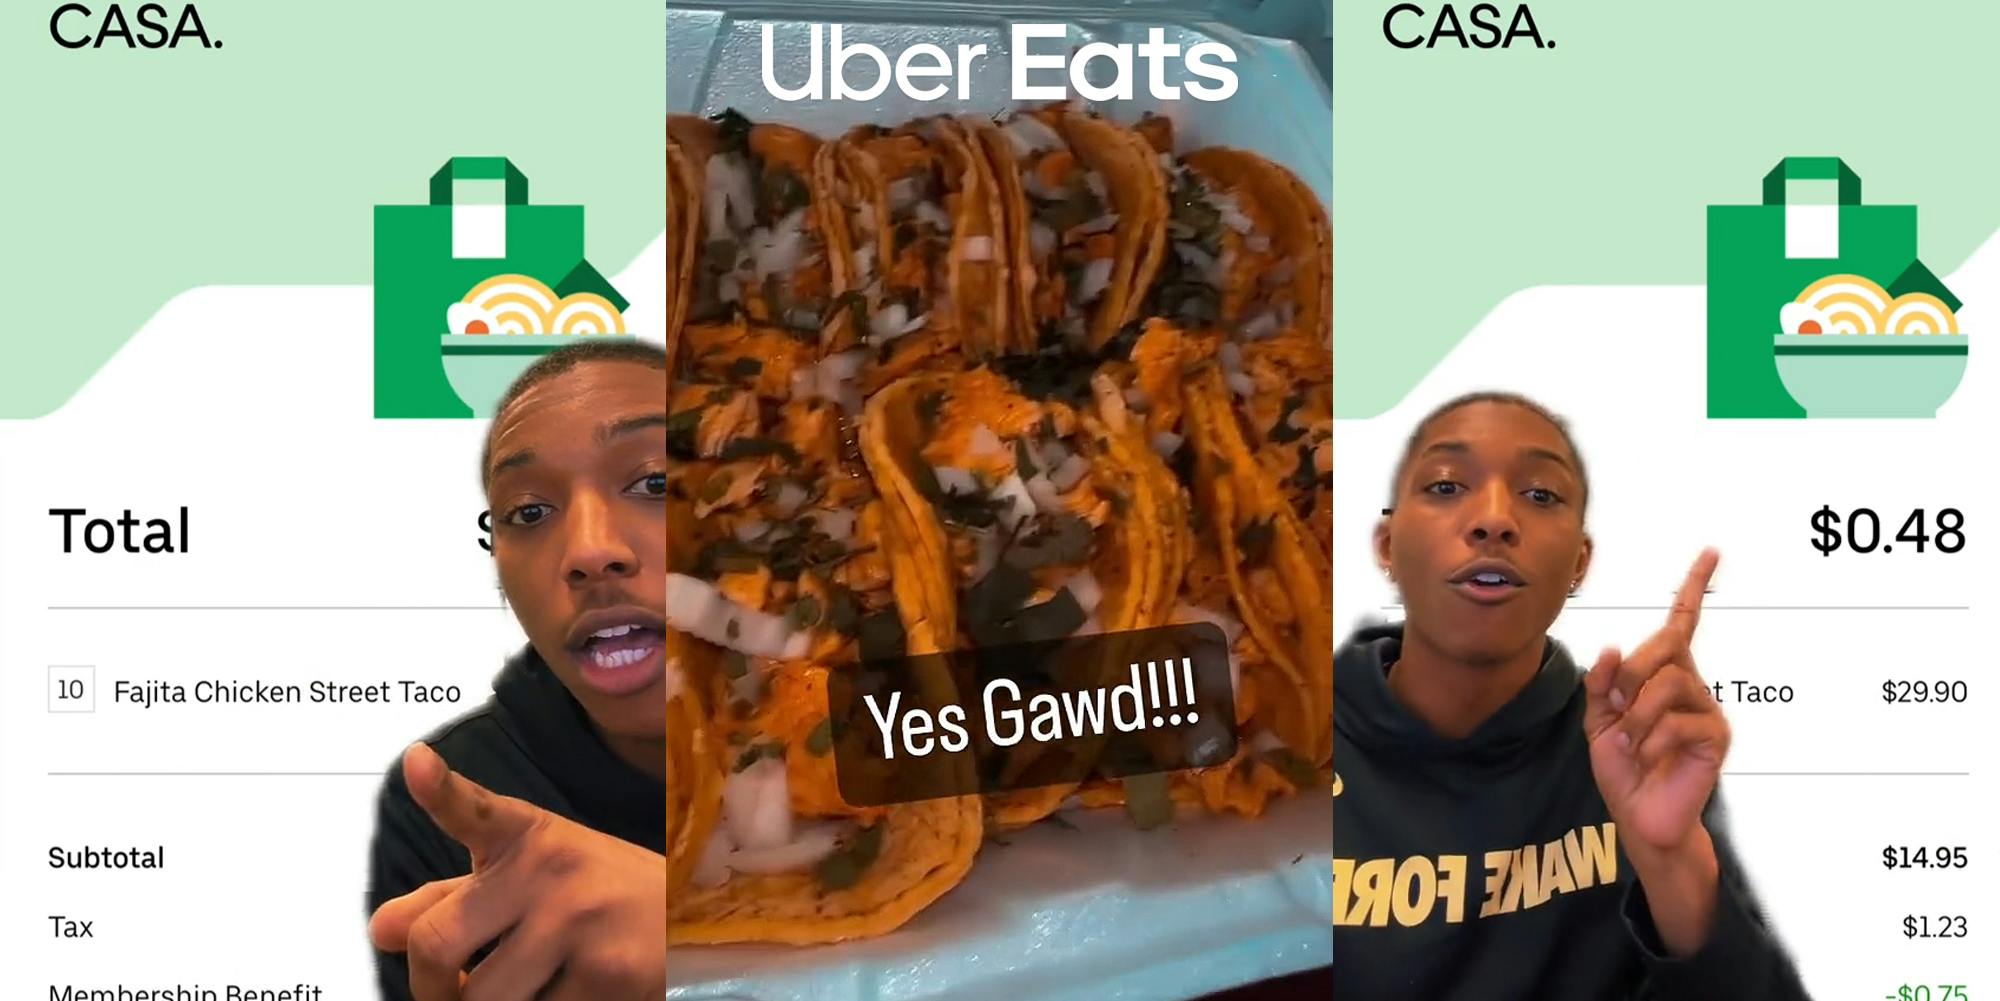 Uber Eats customer greenscreen TikTok over Uber Eats total on screen for ' 10 Fajita Chicken Street Taco' (l) chicken tacos with caption 'Yes Gawd!!!' and Uber Eats logo centered at top (c) Uber Eats customer greenscreen TikTok over Uber Eats total on screen for ' 10 Fajita Chicken Street Taco' at $0.48 from original total of $29.90' (r)